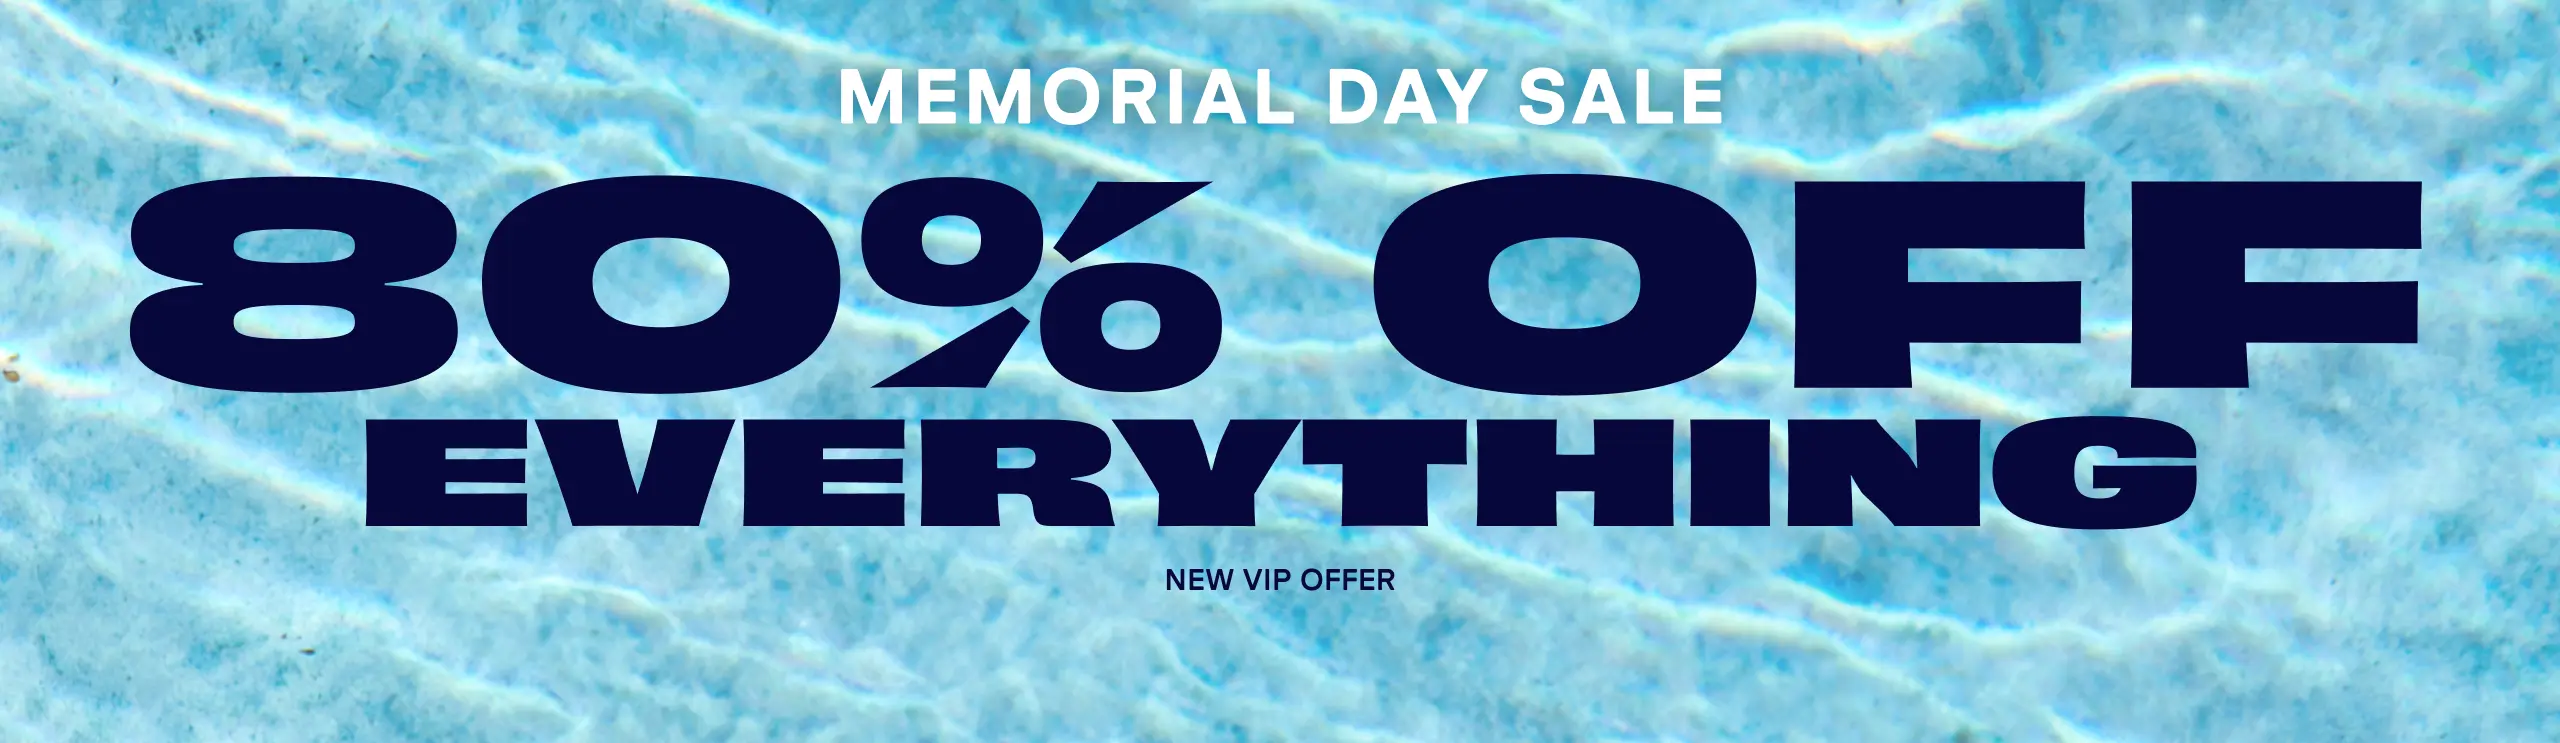 Memorial Day Sale. 80% Off Everything when you sign up as a new VIP member.